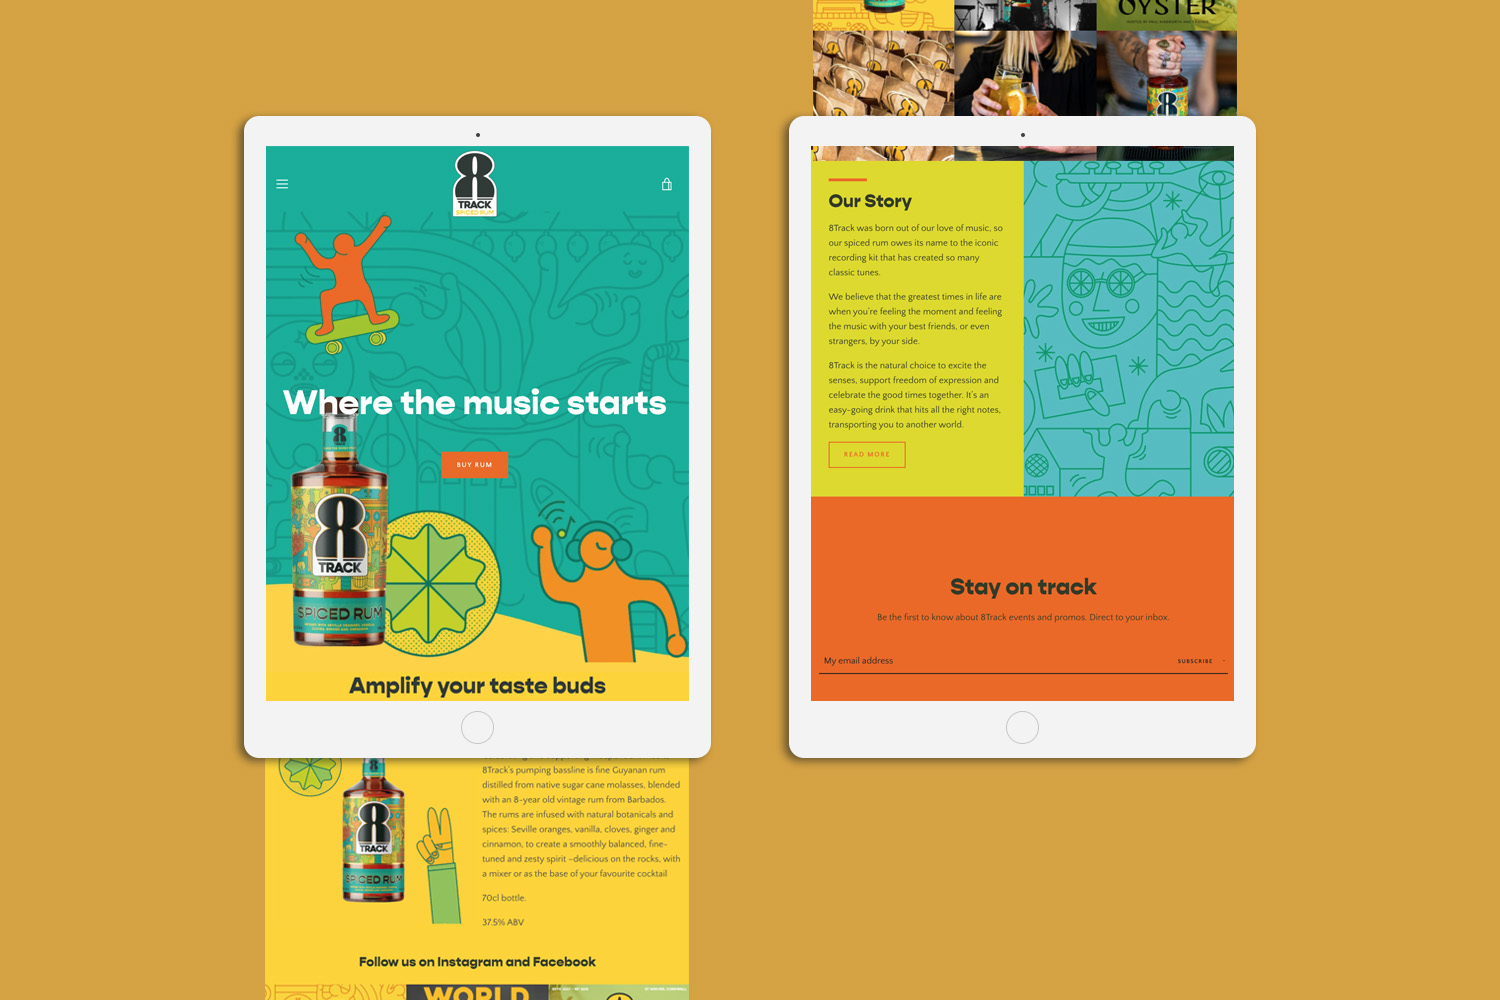 Mock up image of the 8Track Rum website on two iPad screens on a mustard yellow background